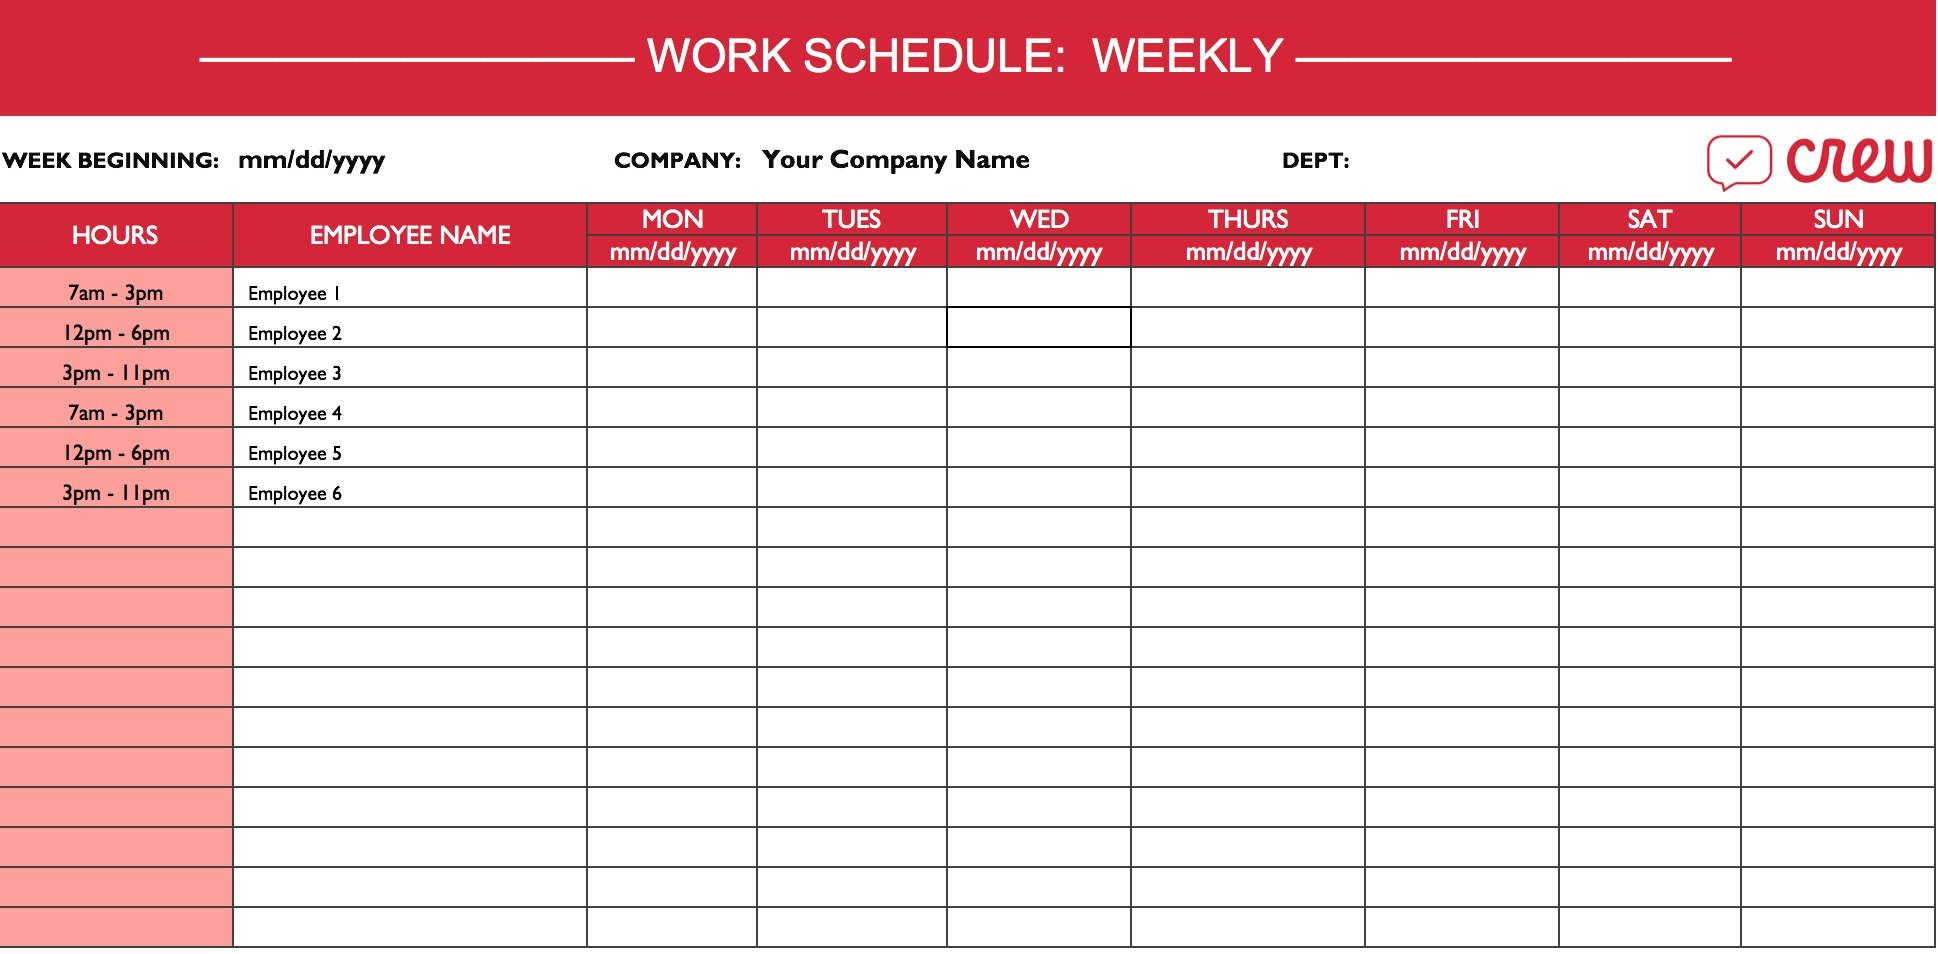 Weekly Work Schedule Template | Professional Template with Employee Schedule Templates